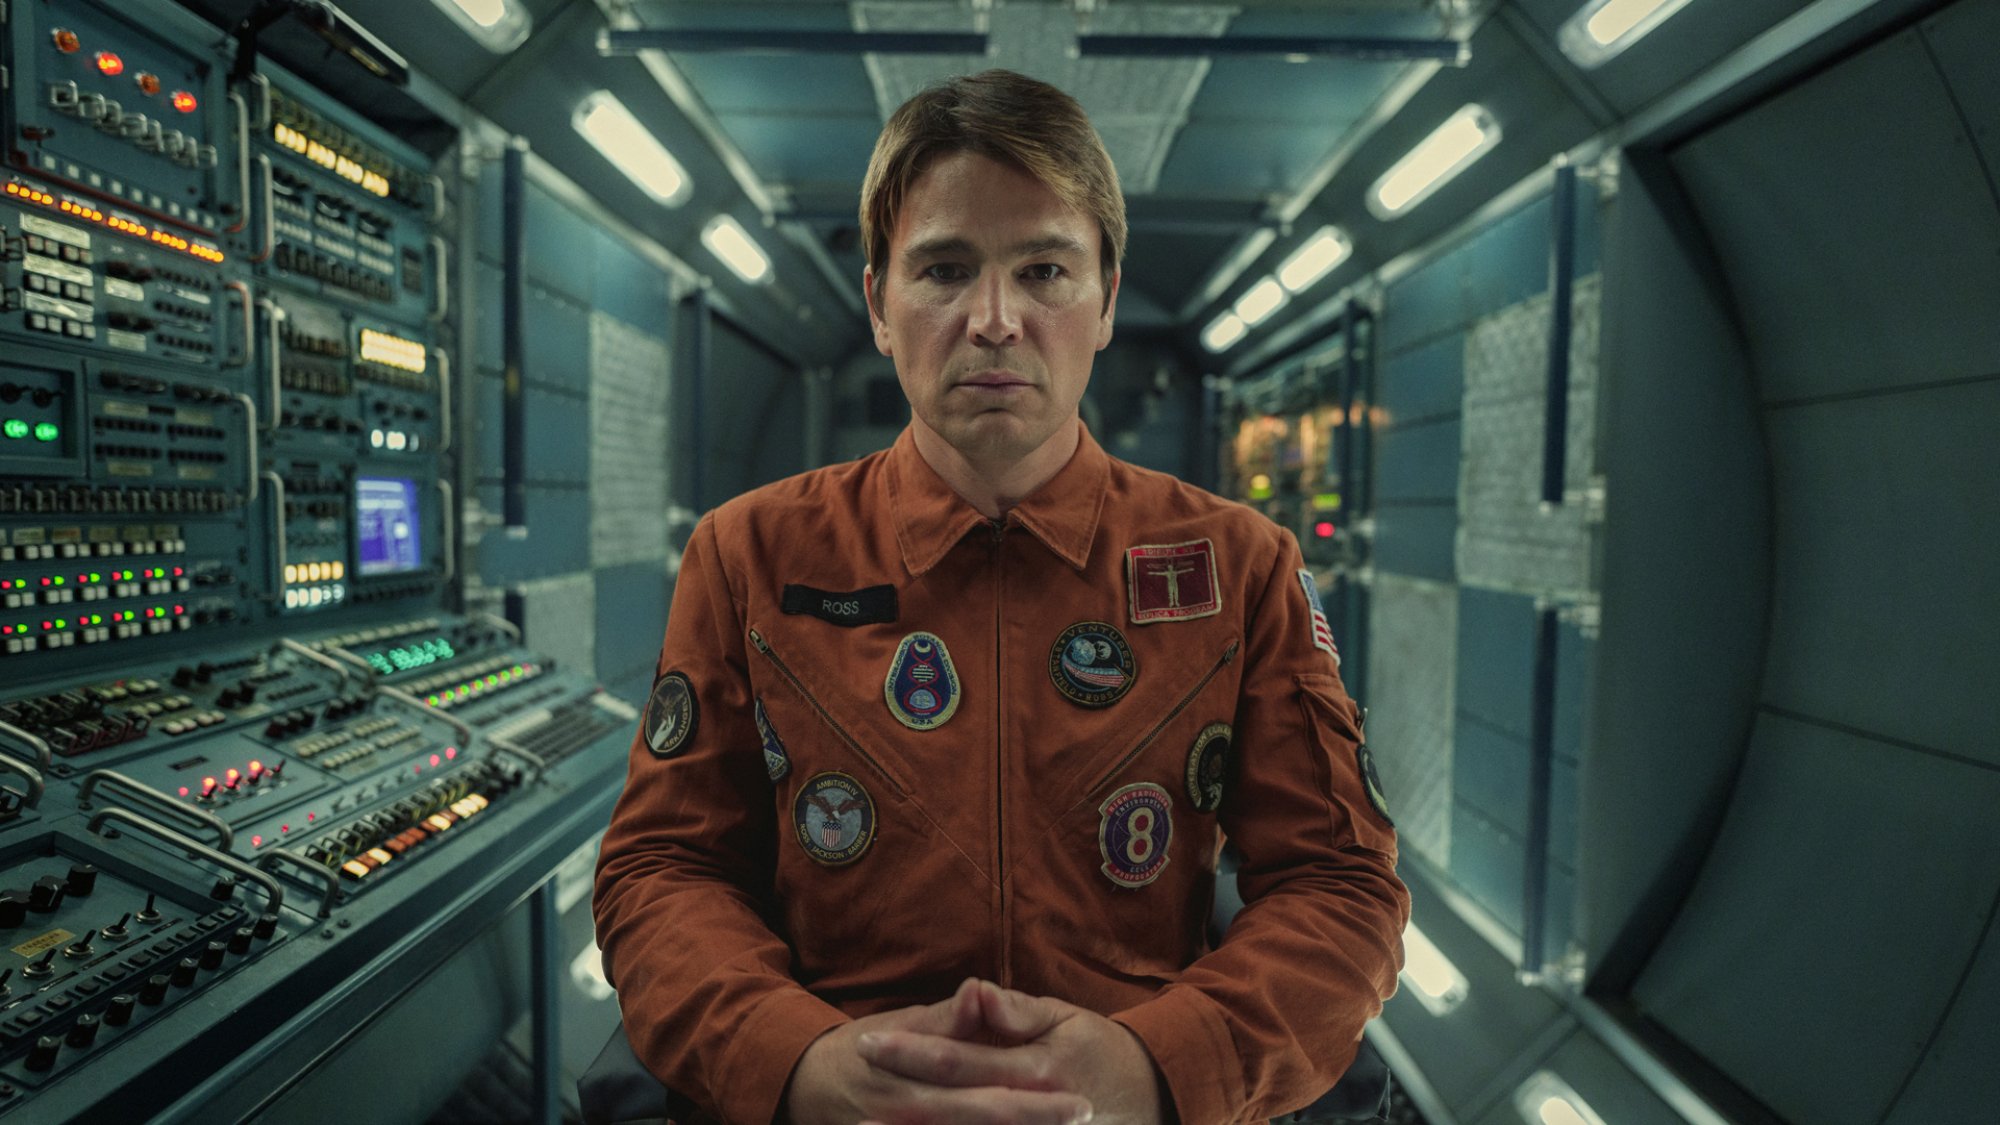 In the TV show "Black Mirror" Josh Hartnett is an astronaut sitting formally facing the camera in a space station.